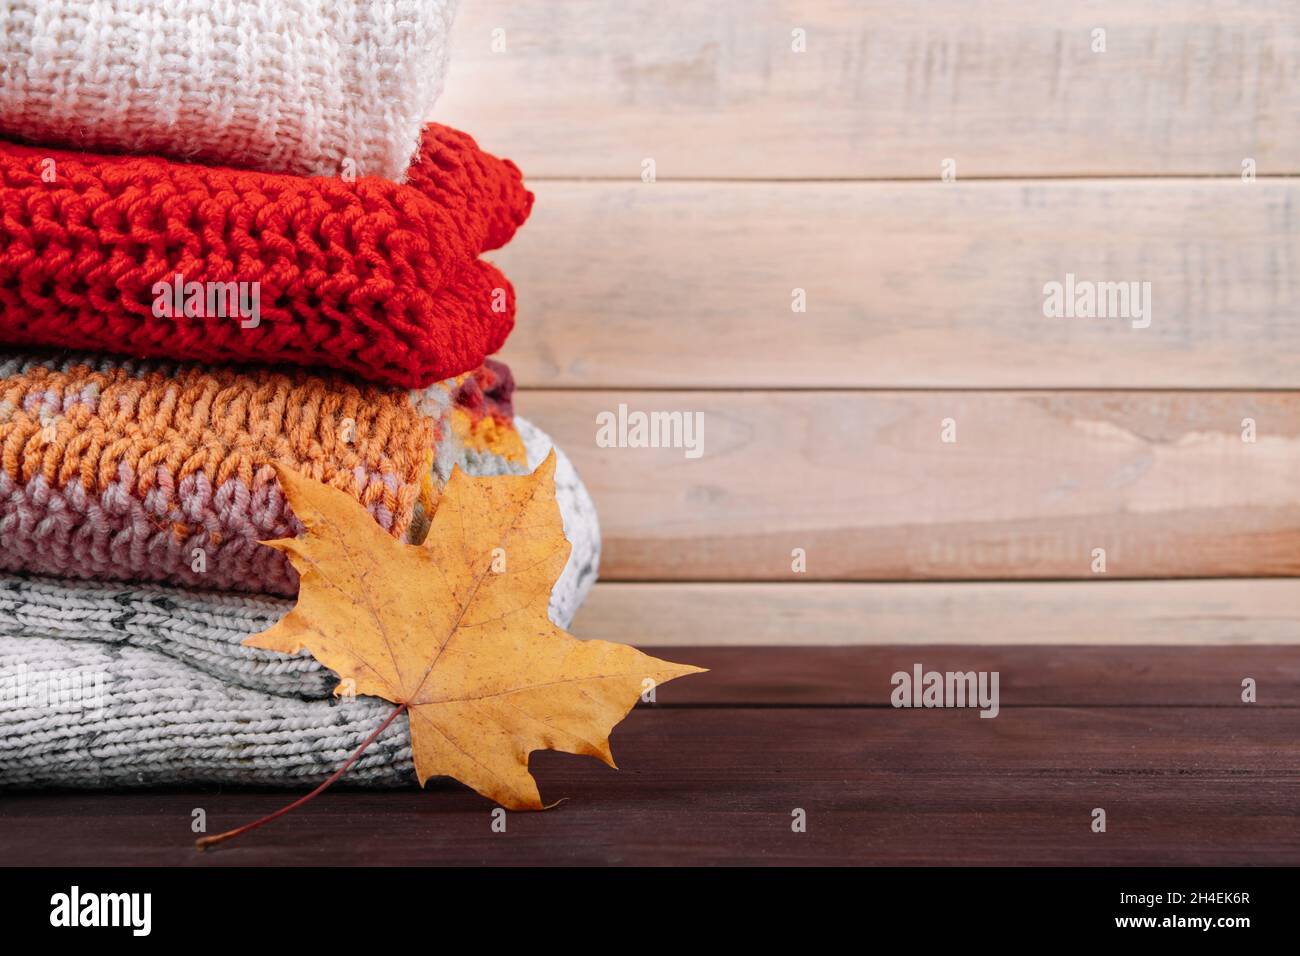 Stack of warm knitted sweaters. Autumn concept. Woolen jumpers and maple leaf on a wooden background. Stock Photo